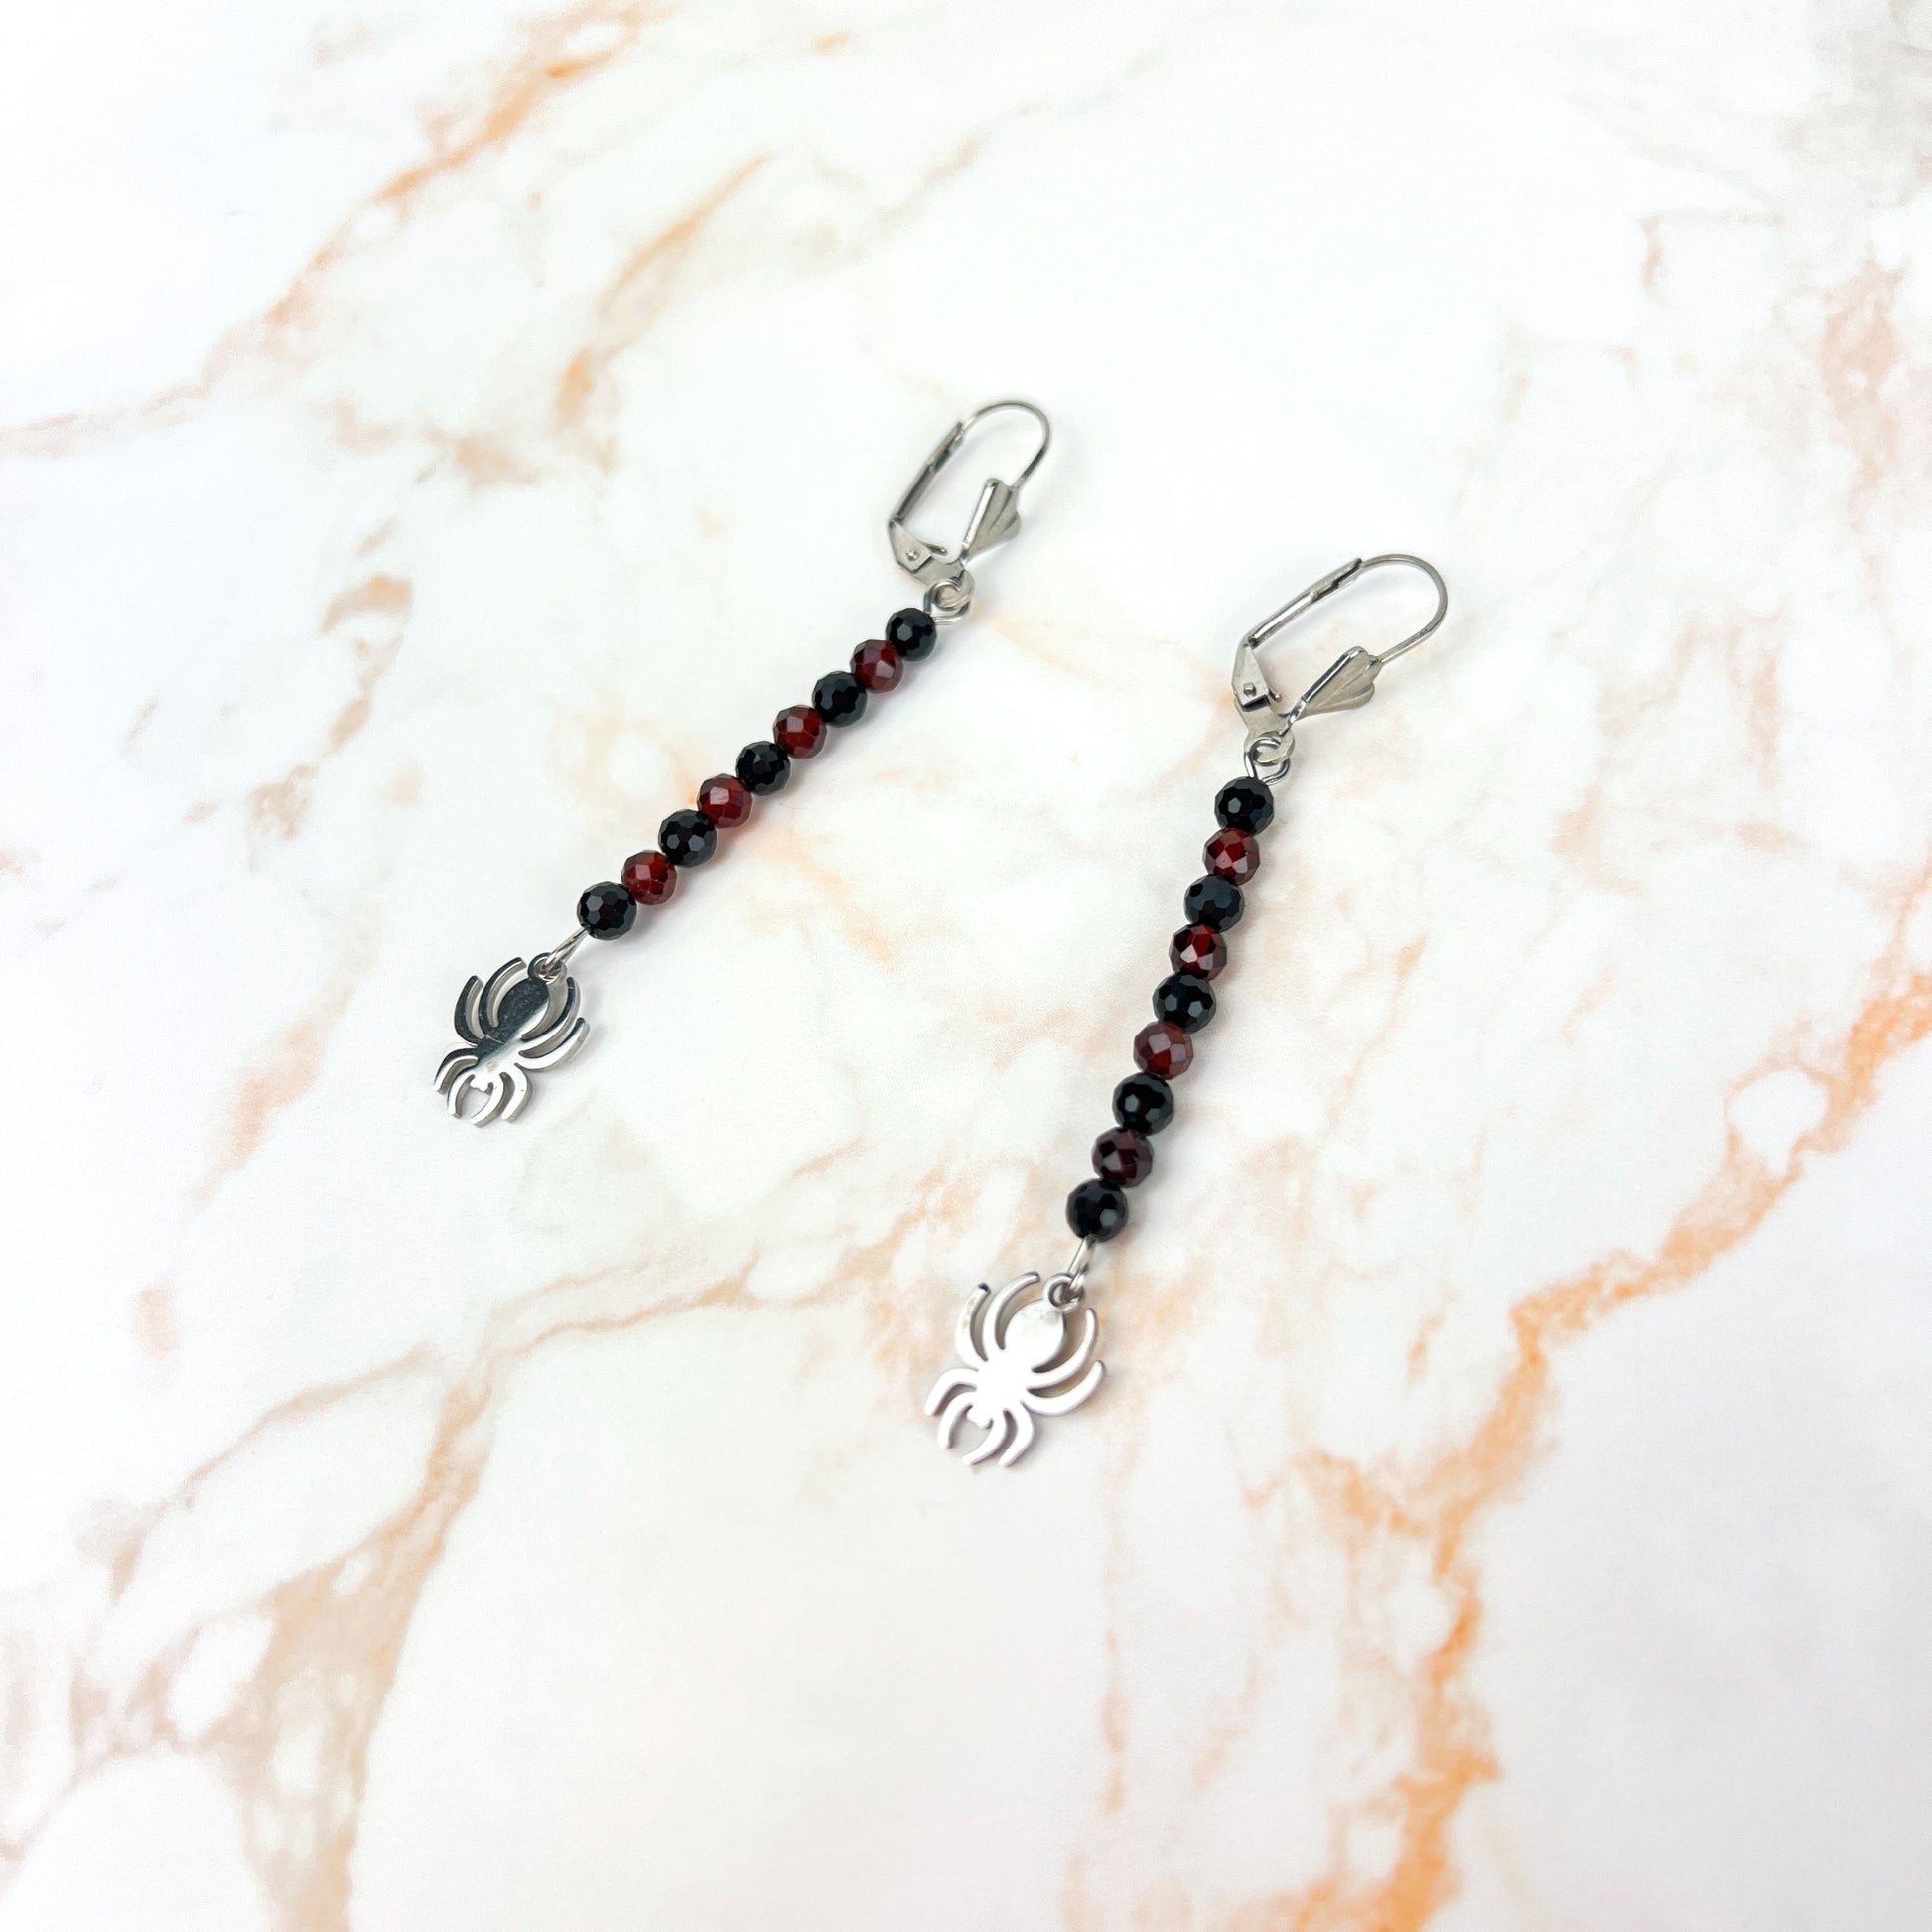 Gothic spider earrings with garnet, onyx and stainless steel elegant gothic jewelry witchy gemstone earrings